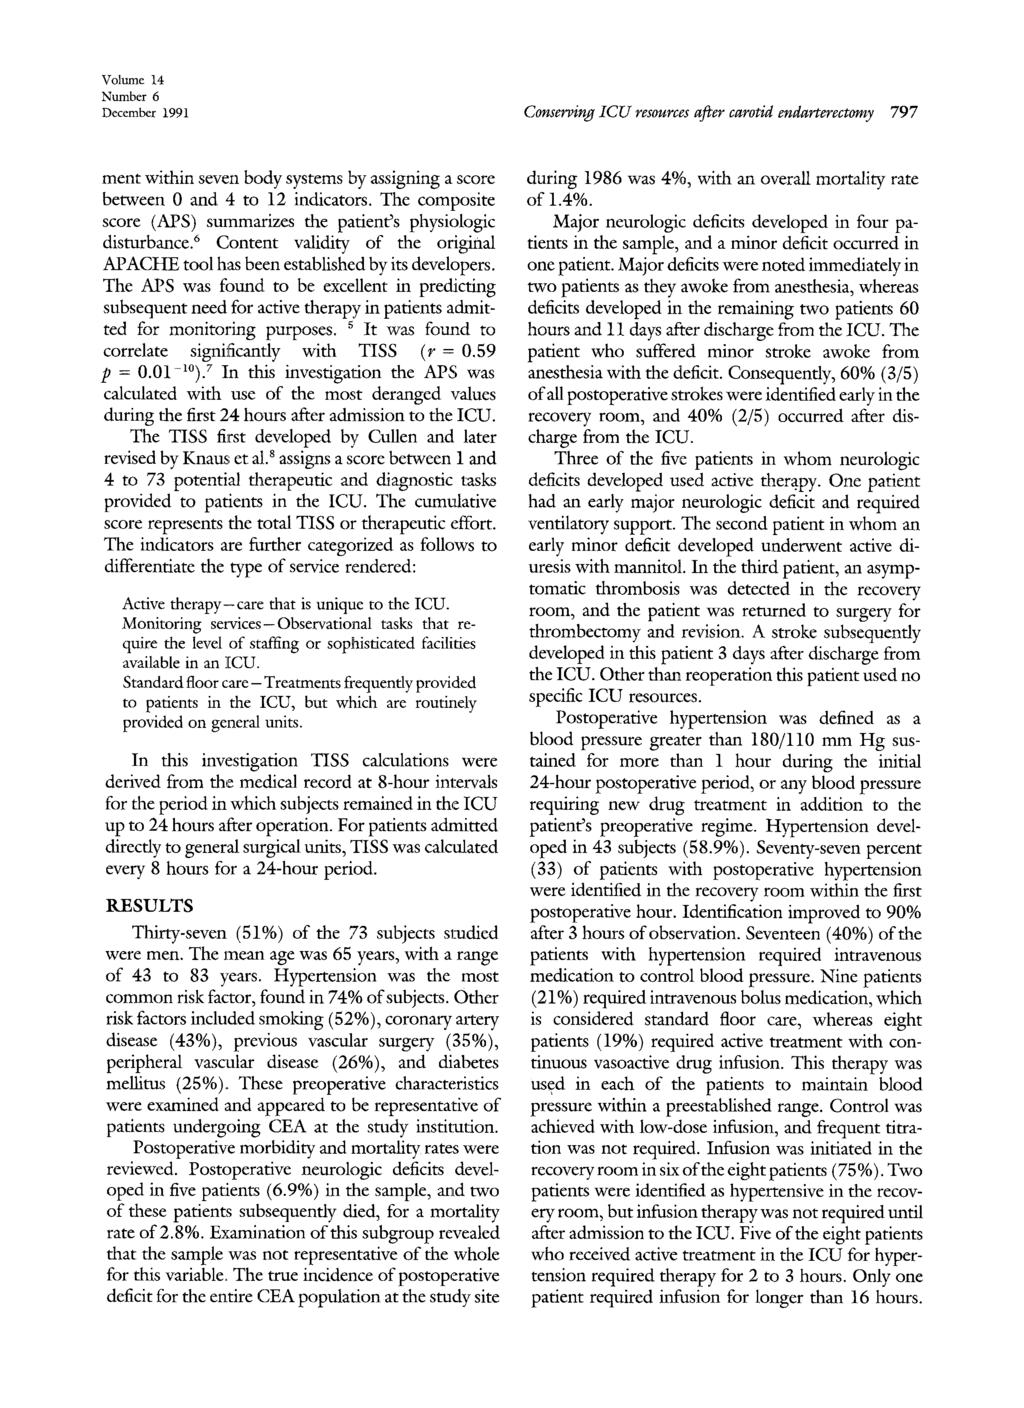 Volume 14 Number 6 December 1991 Conserving ICU resources after carotid endarterectomy 797 ment within seven body systems by assigning a score between 0 and 4 to 12 indicators.